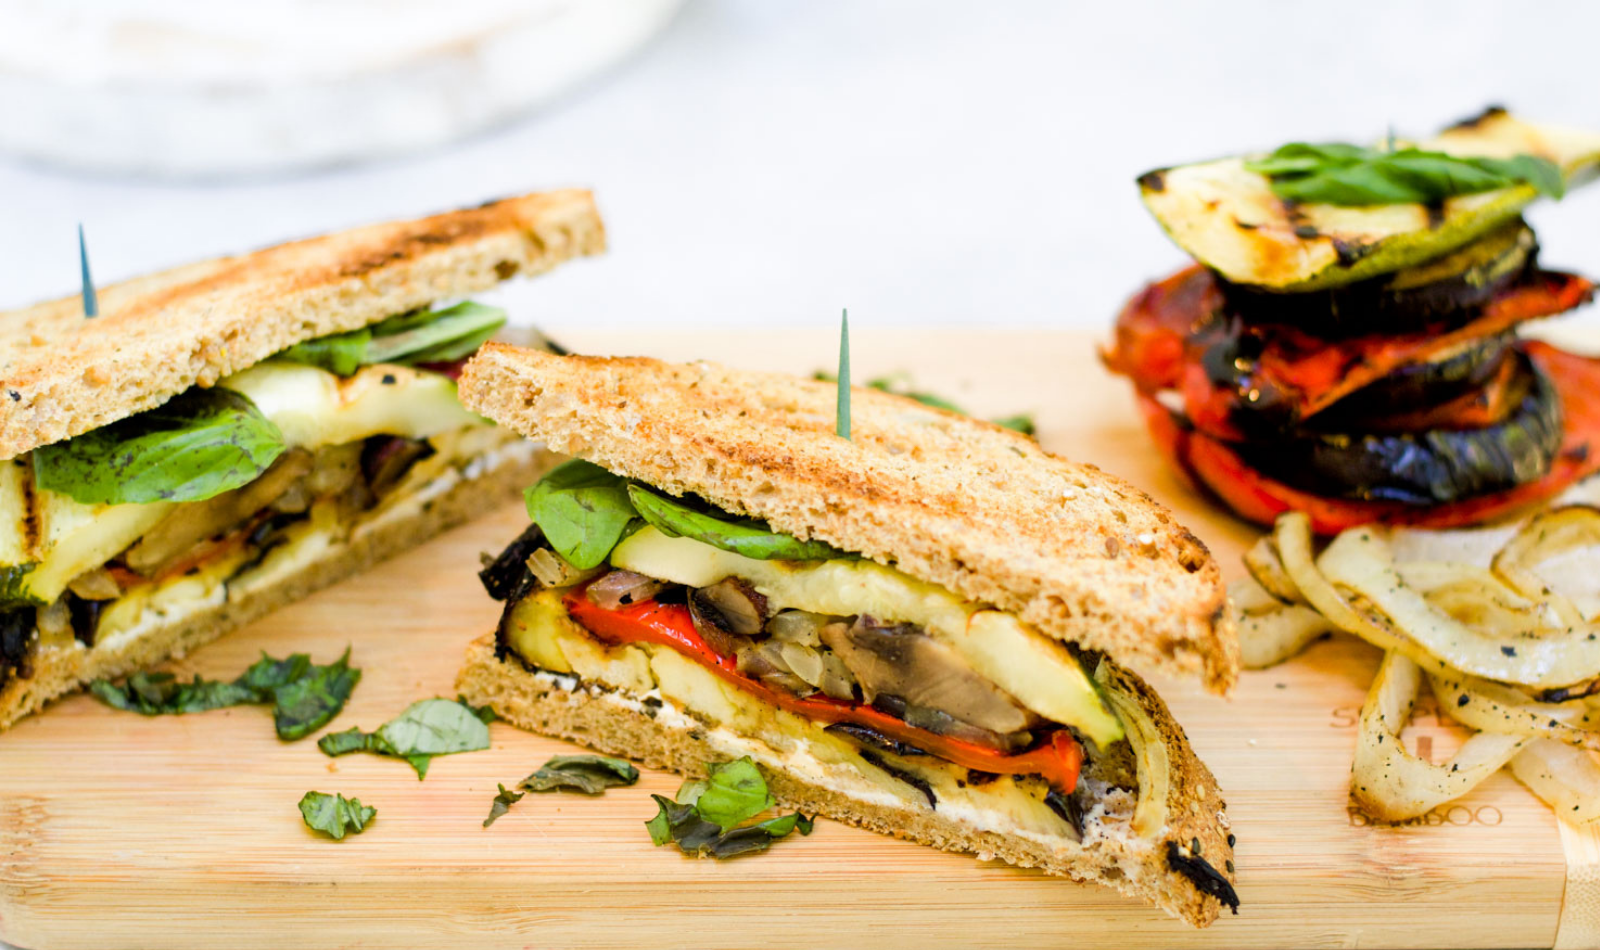 https://www.macrostax.com/wp-content/uploads/2021/12/Blog_Featured_Image_-_Grilled_Veggie_and_Goat_Cheese_Panini.png